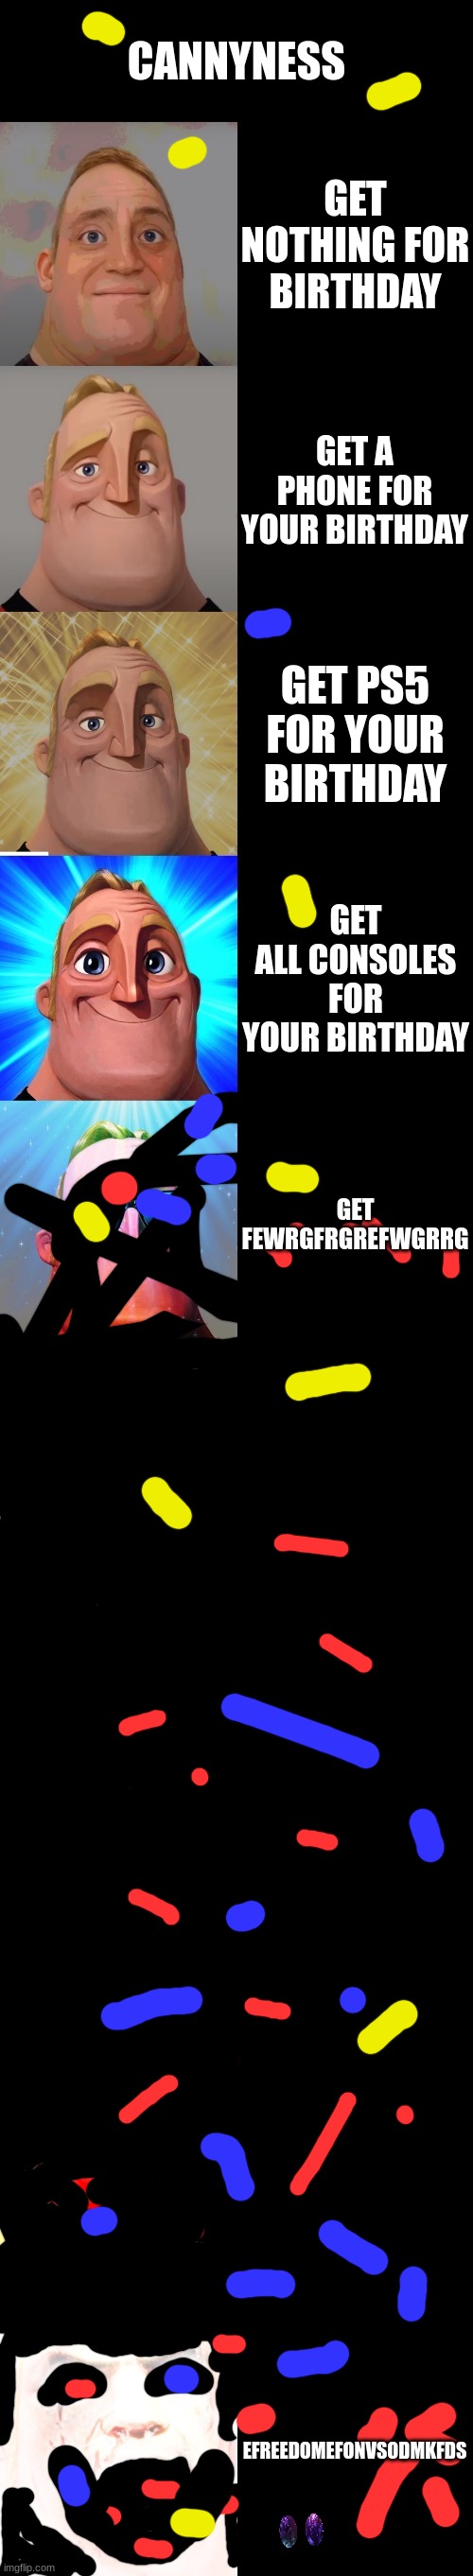 well shoot. | CANNYNESS; GET NOTHING FOR BIRTHDAY; GET A PHONE FOR YOUR BIRTHDAY; GET PS5 FOR YOUR BIRTHDAY; GET ALL CONSOLES FOR YOUR BIRTHDAY; GET FEWRGFRGREFWGRRG; EFREEDOMEFONVSODMKFDS | image tagged in mr incredible becoming canny | made w/ Imgflip meme maker